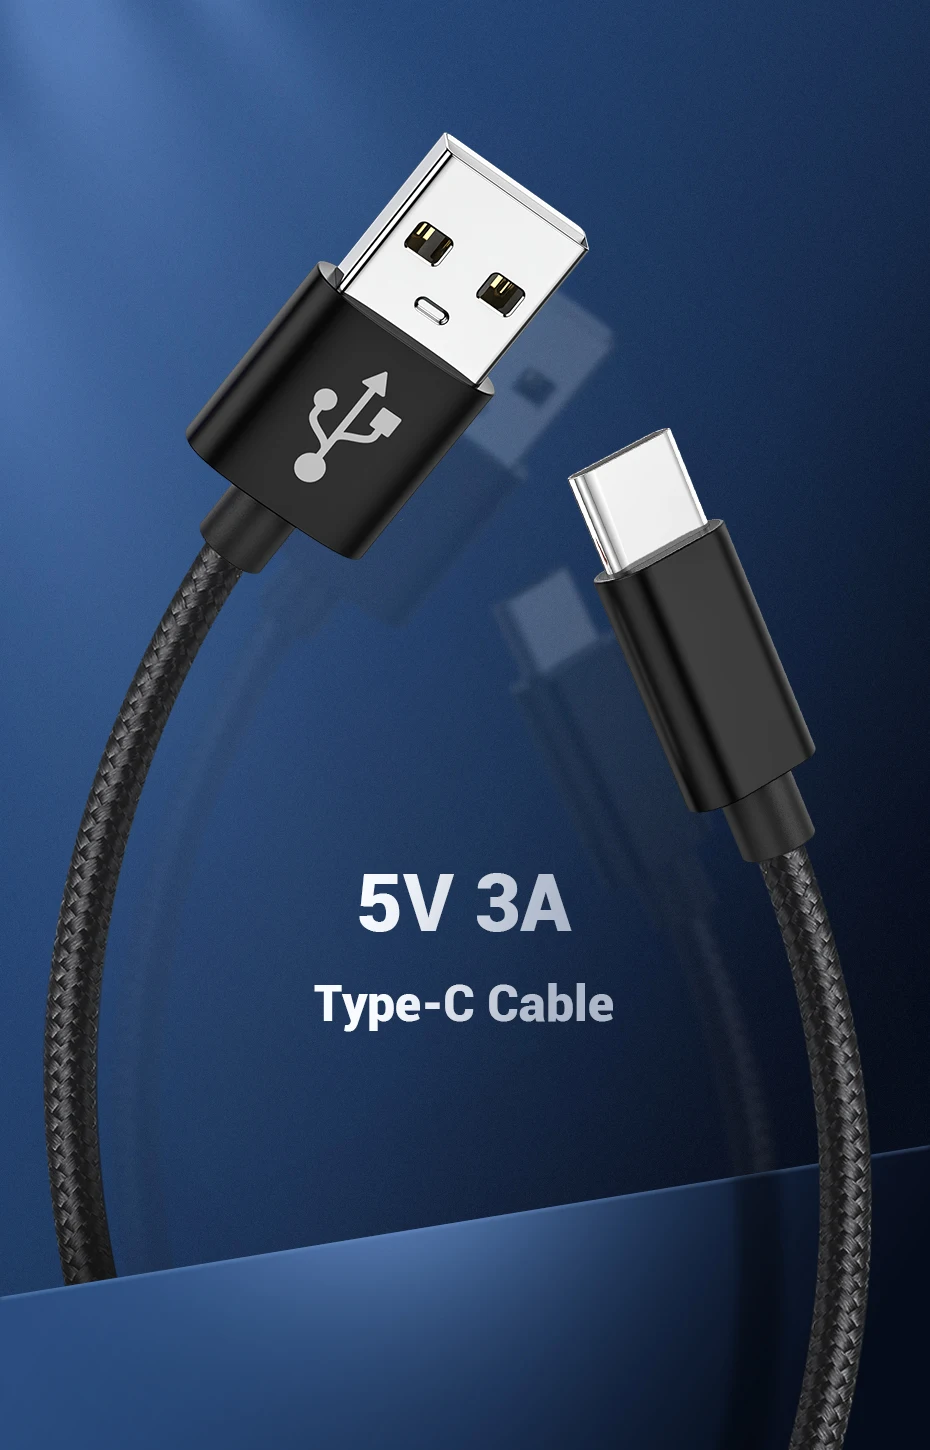 TOPK USBC Cable USB Type C Cable 3A Fast Charge Data Cable for Samsung S9+ S9 S10 Plus Xiaomi Redmi K20 Pro Phone Charger Cable